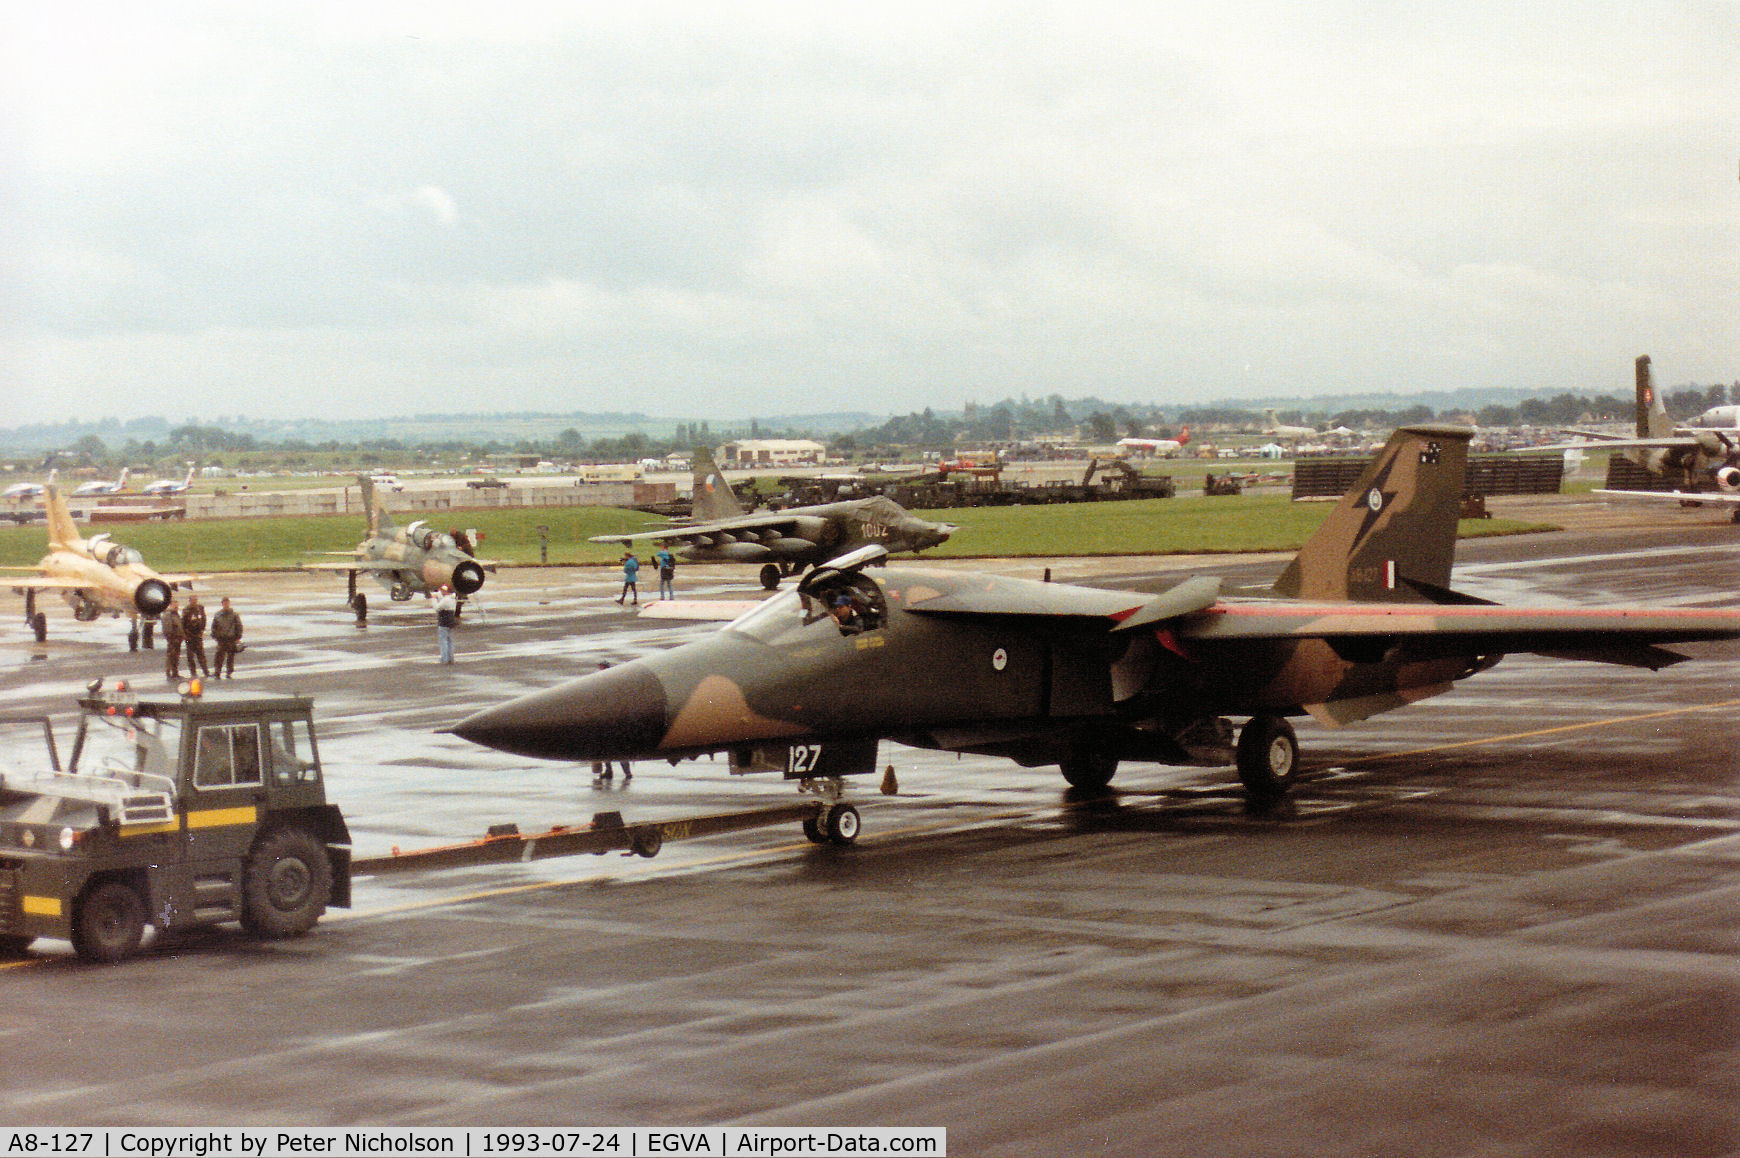 A8-127, 1967 General Dynamics F-111C Aardvark C/N D1-03, Another view of the F-111C of 1 Squadron Royal Australian Air Force on the flight-line at the 1993 Intnl Air Tattoo at RAF Fairford.